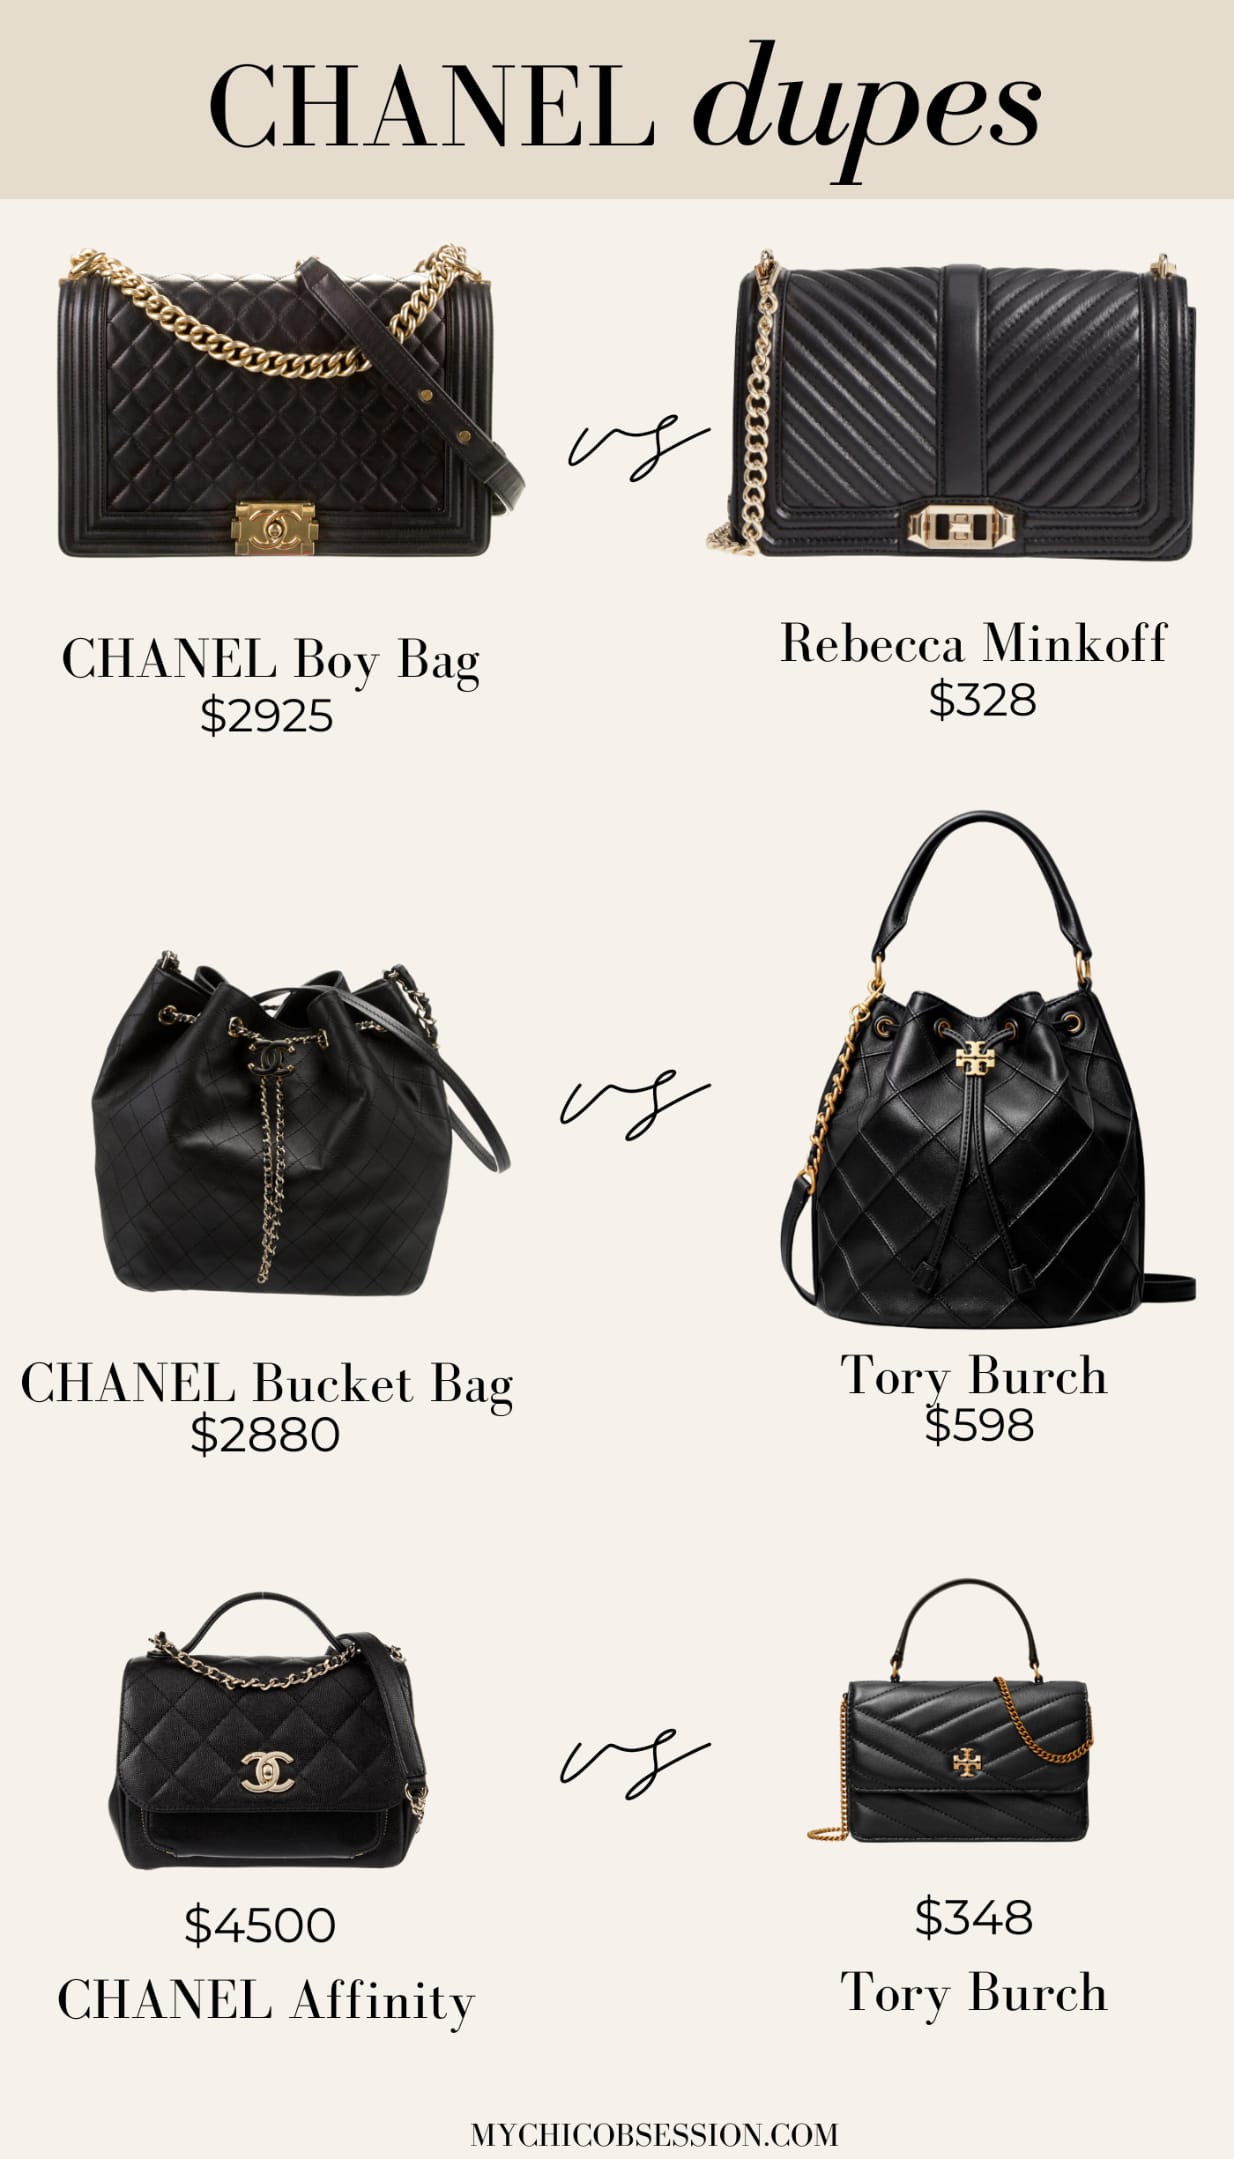 chanel dupes